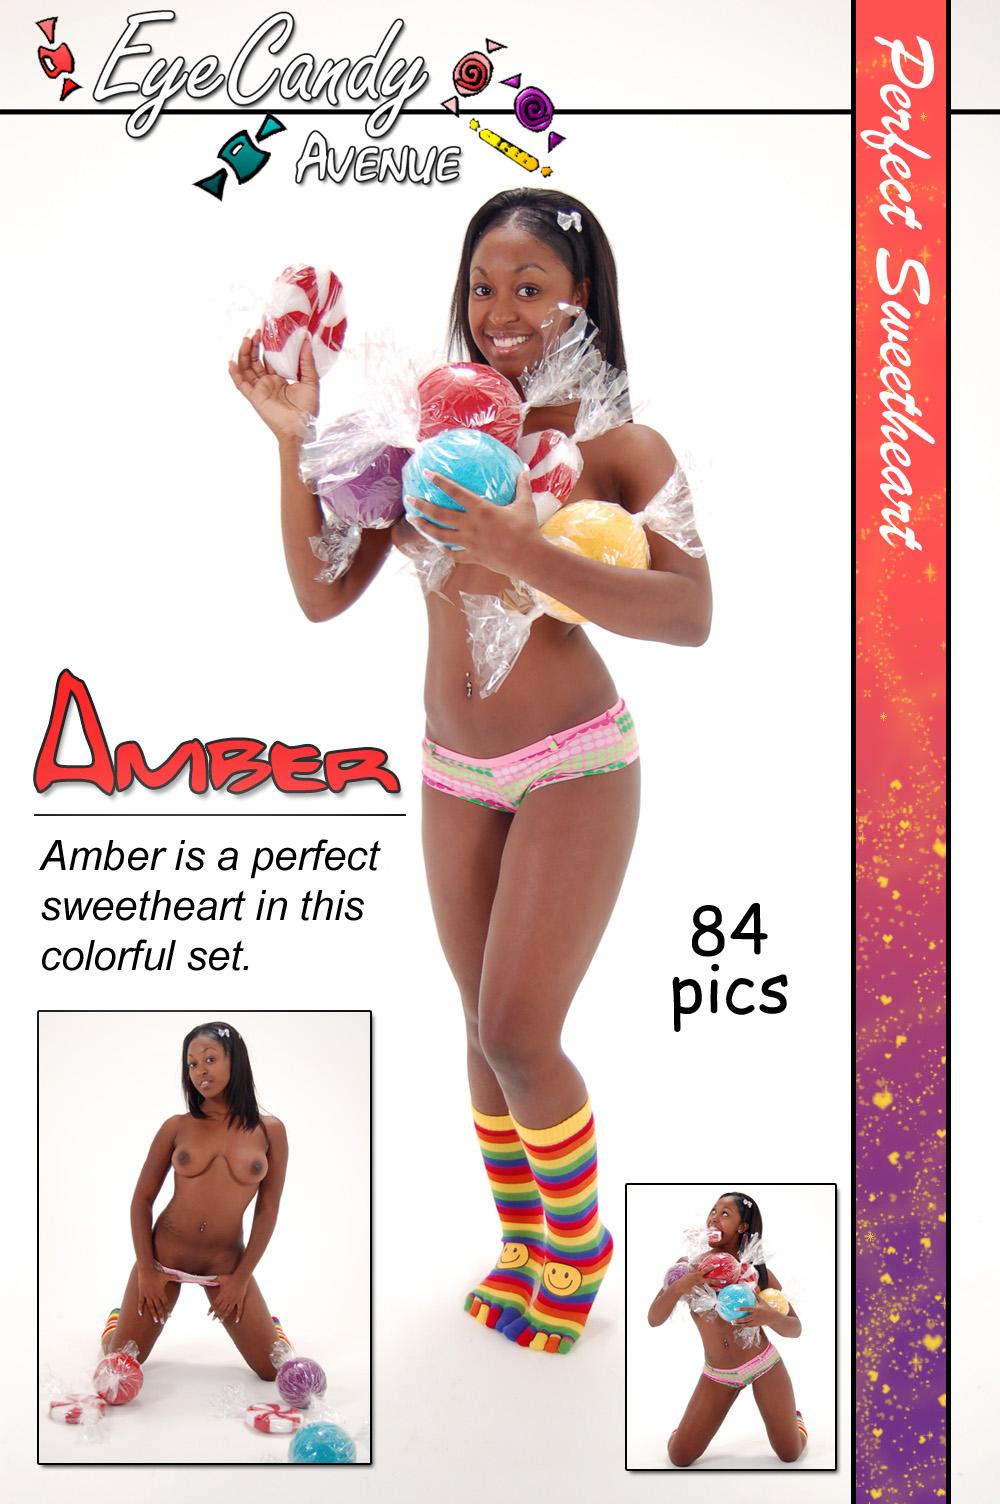 Amber posing naked with colorful candy